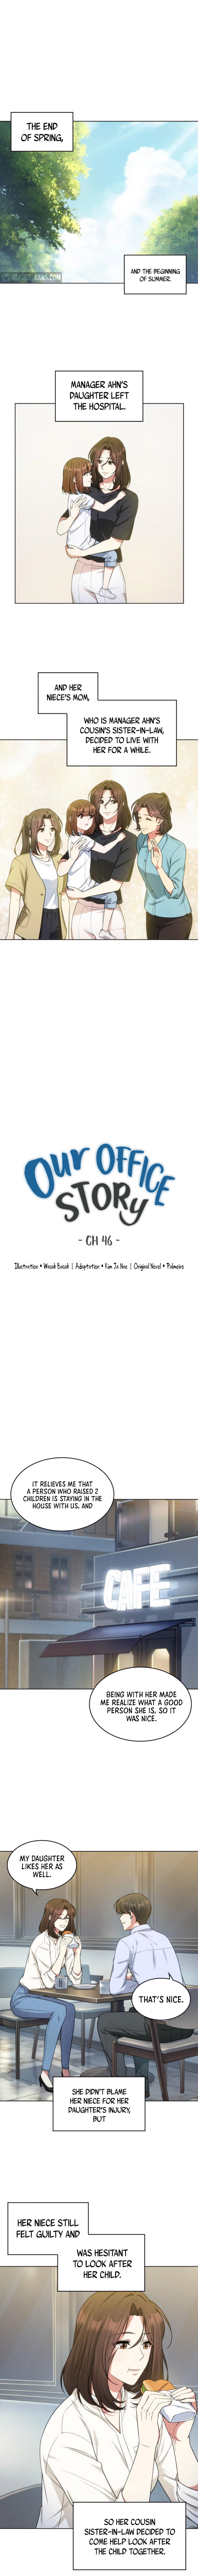 My Office Noona's Story - Chapter 46 - Coffee Manga